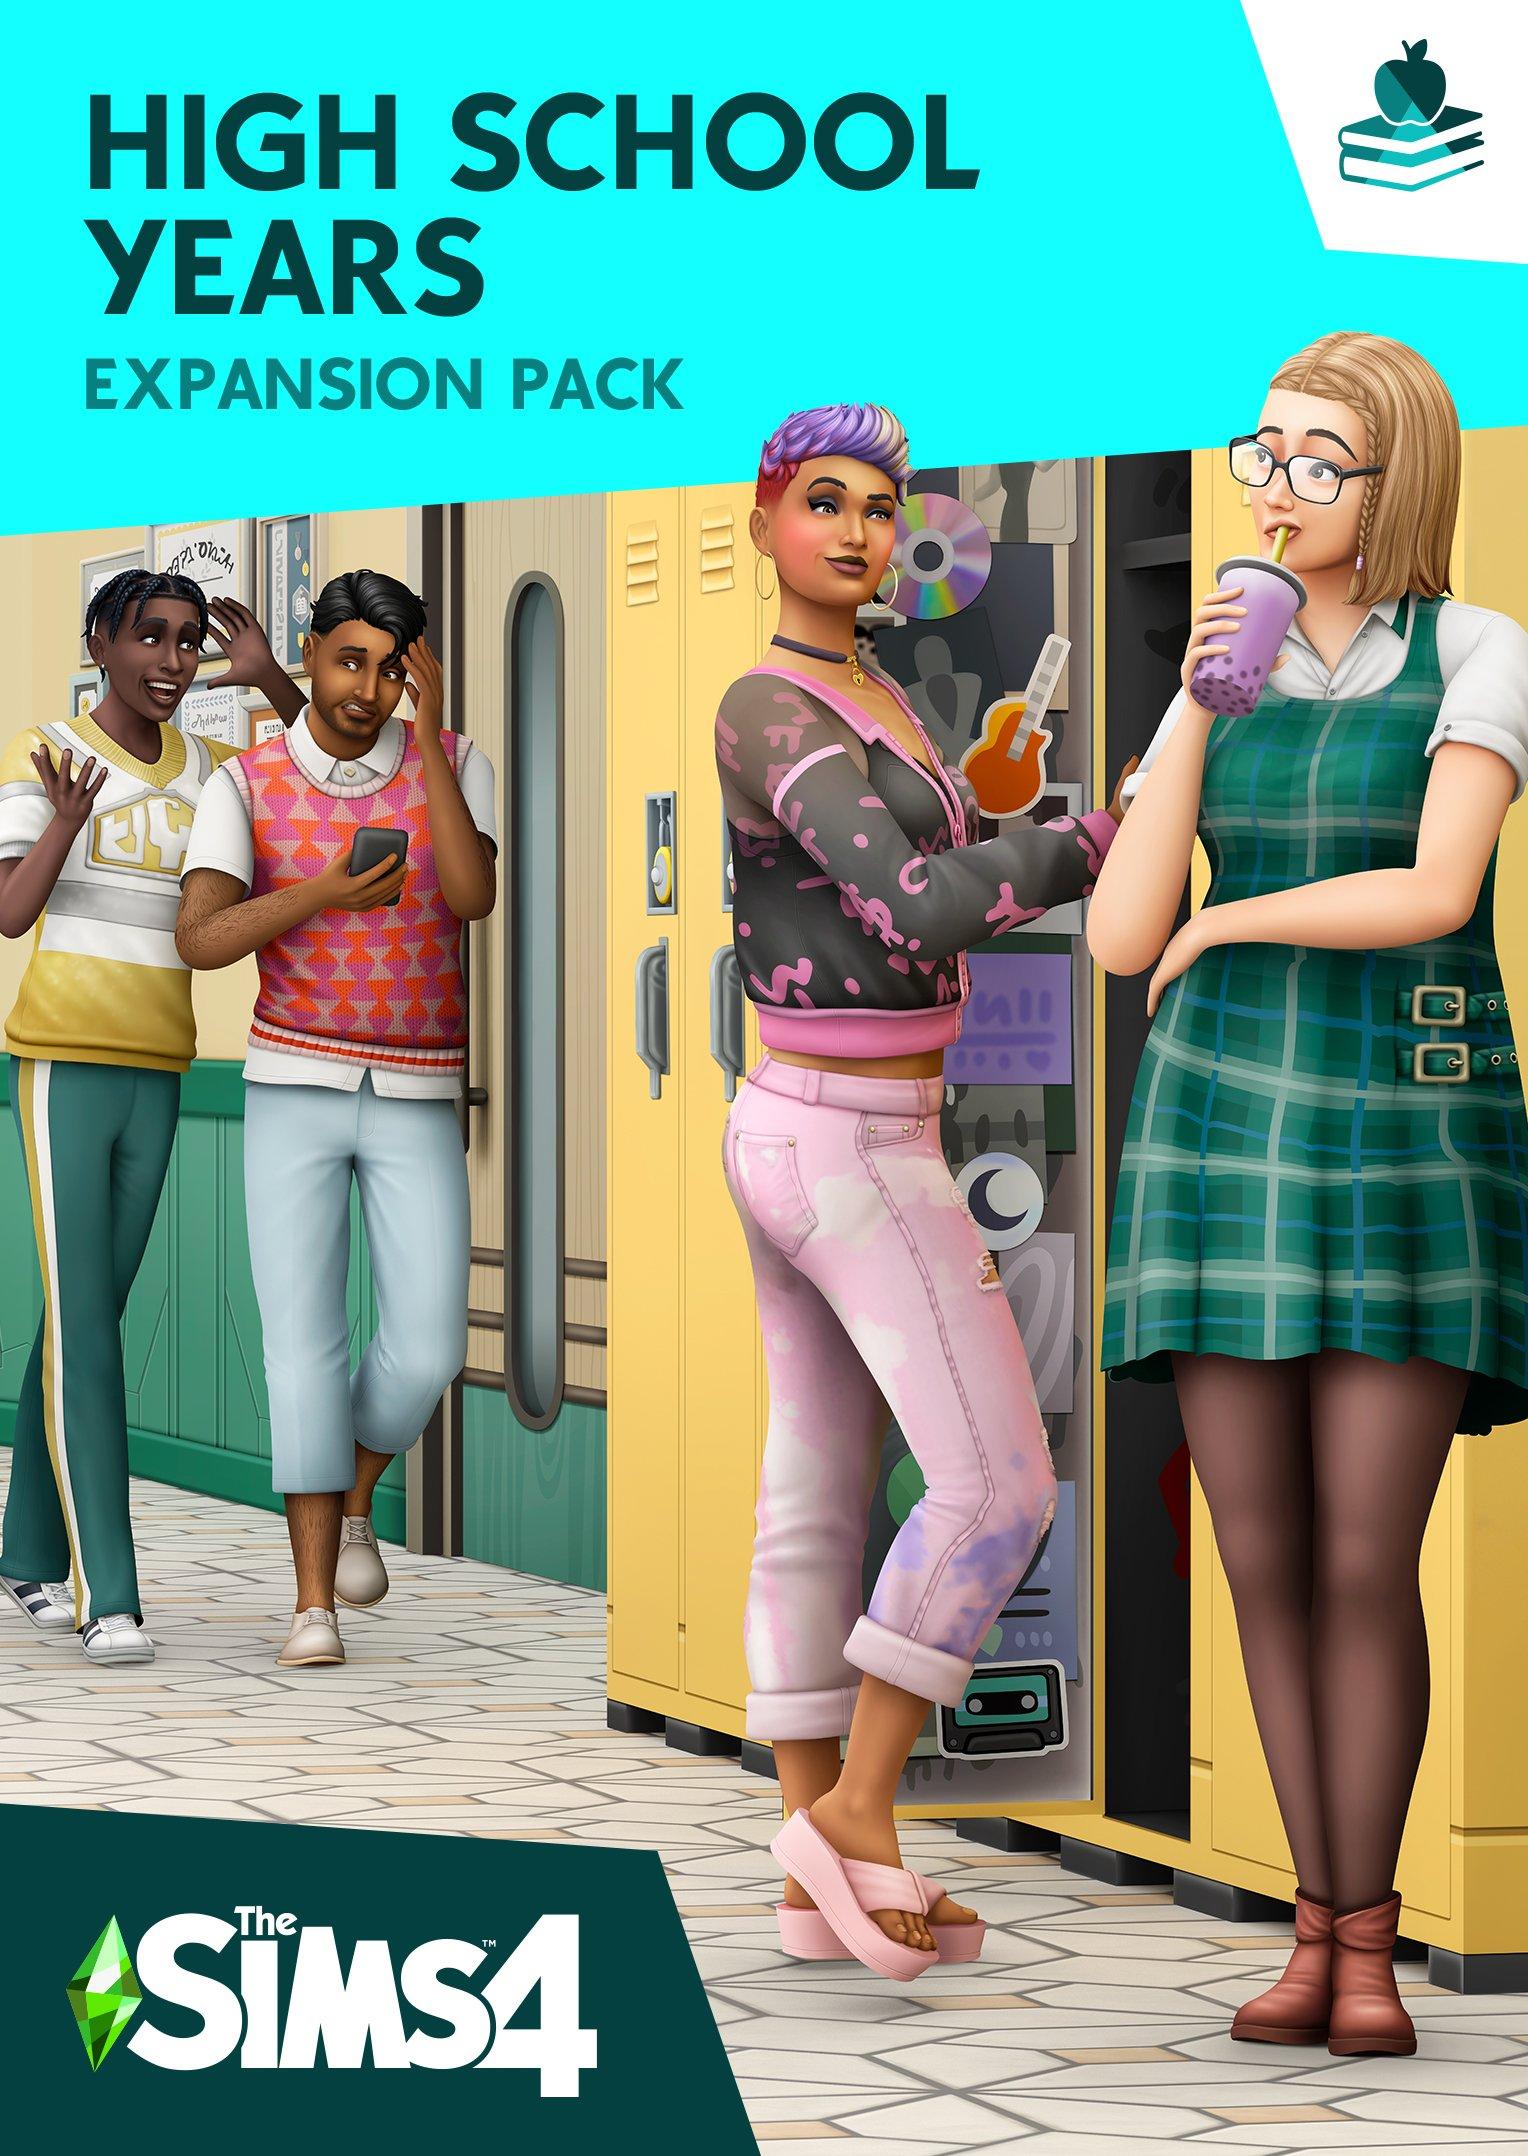 The Sims 4 High School Years Expansion Pack DLC - PC EA app